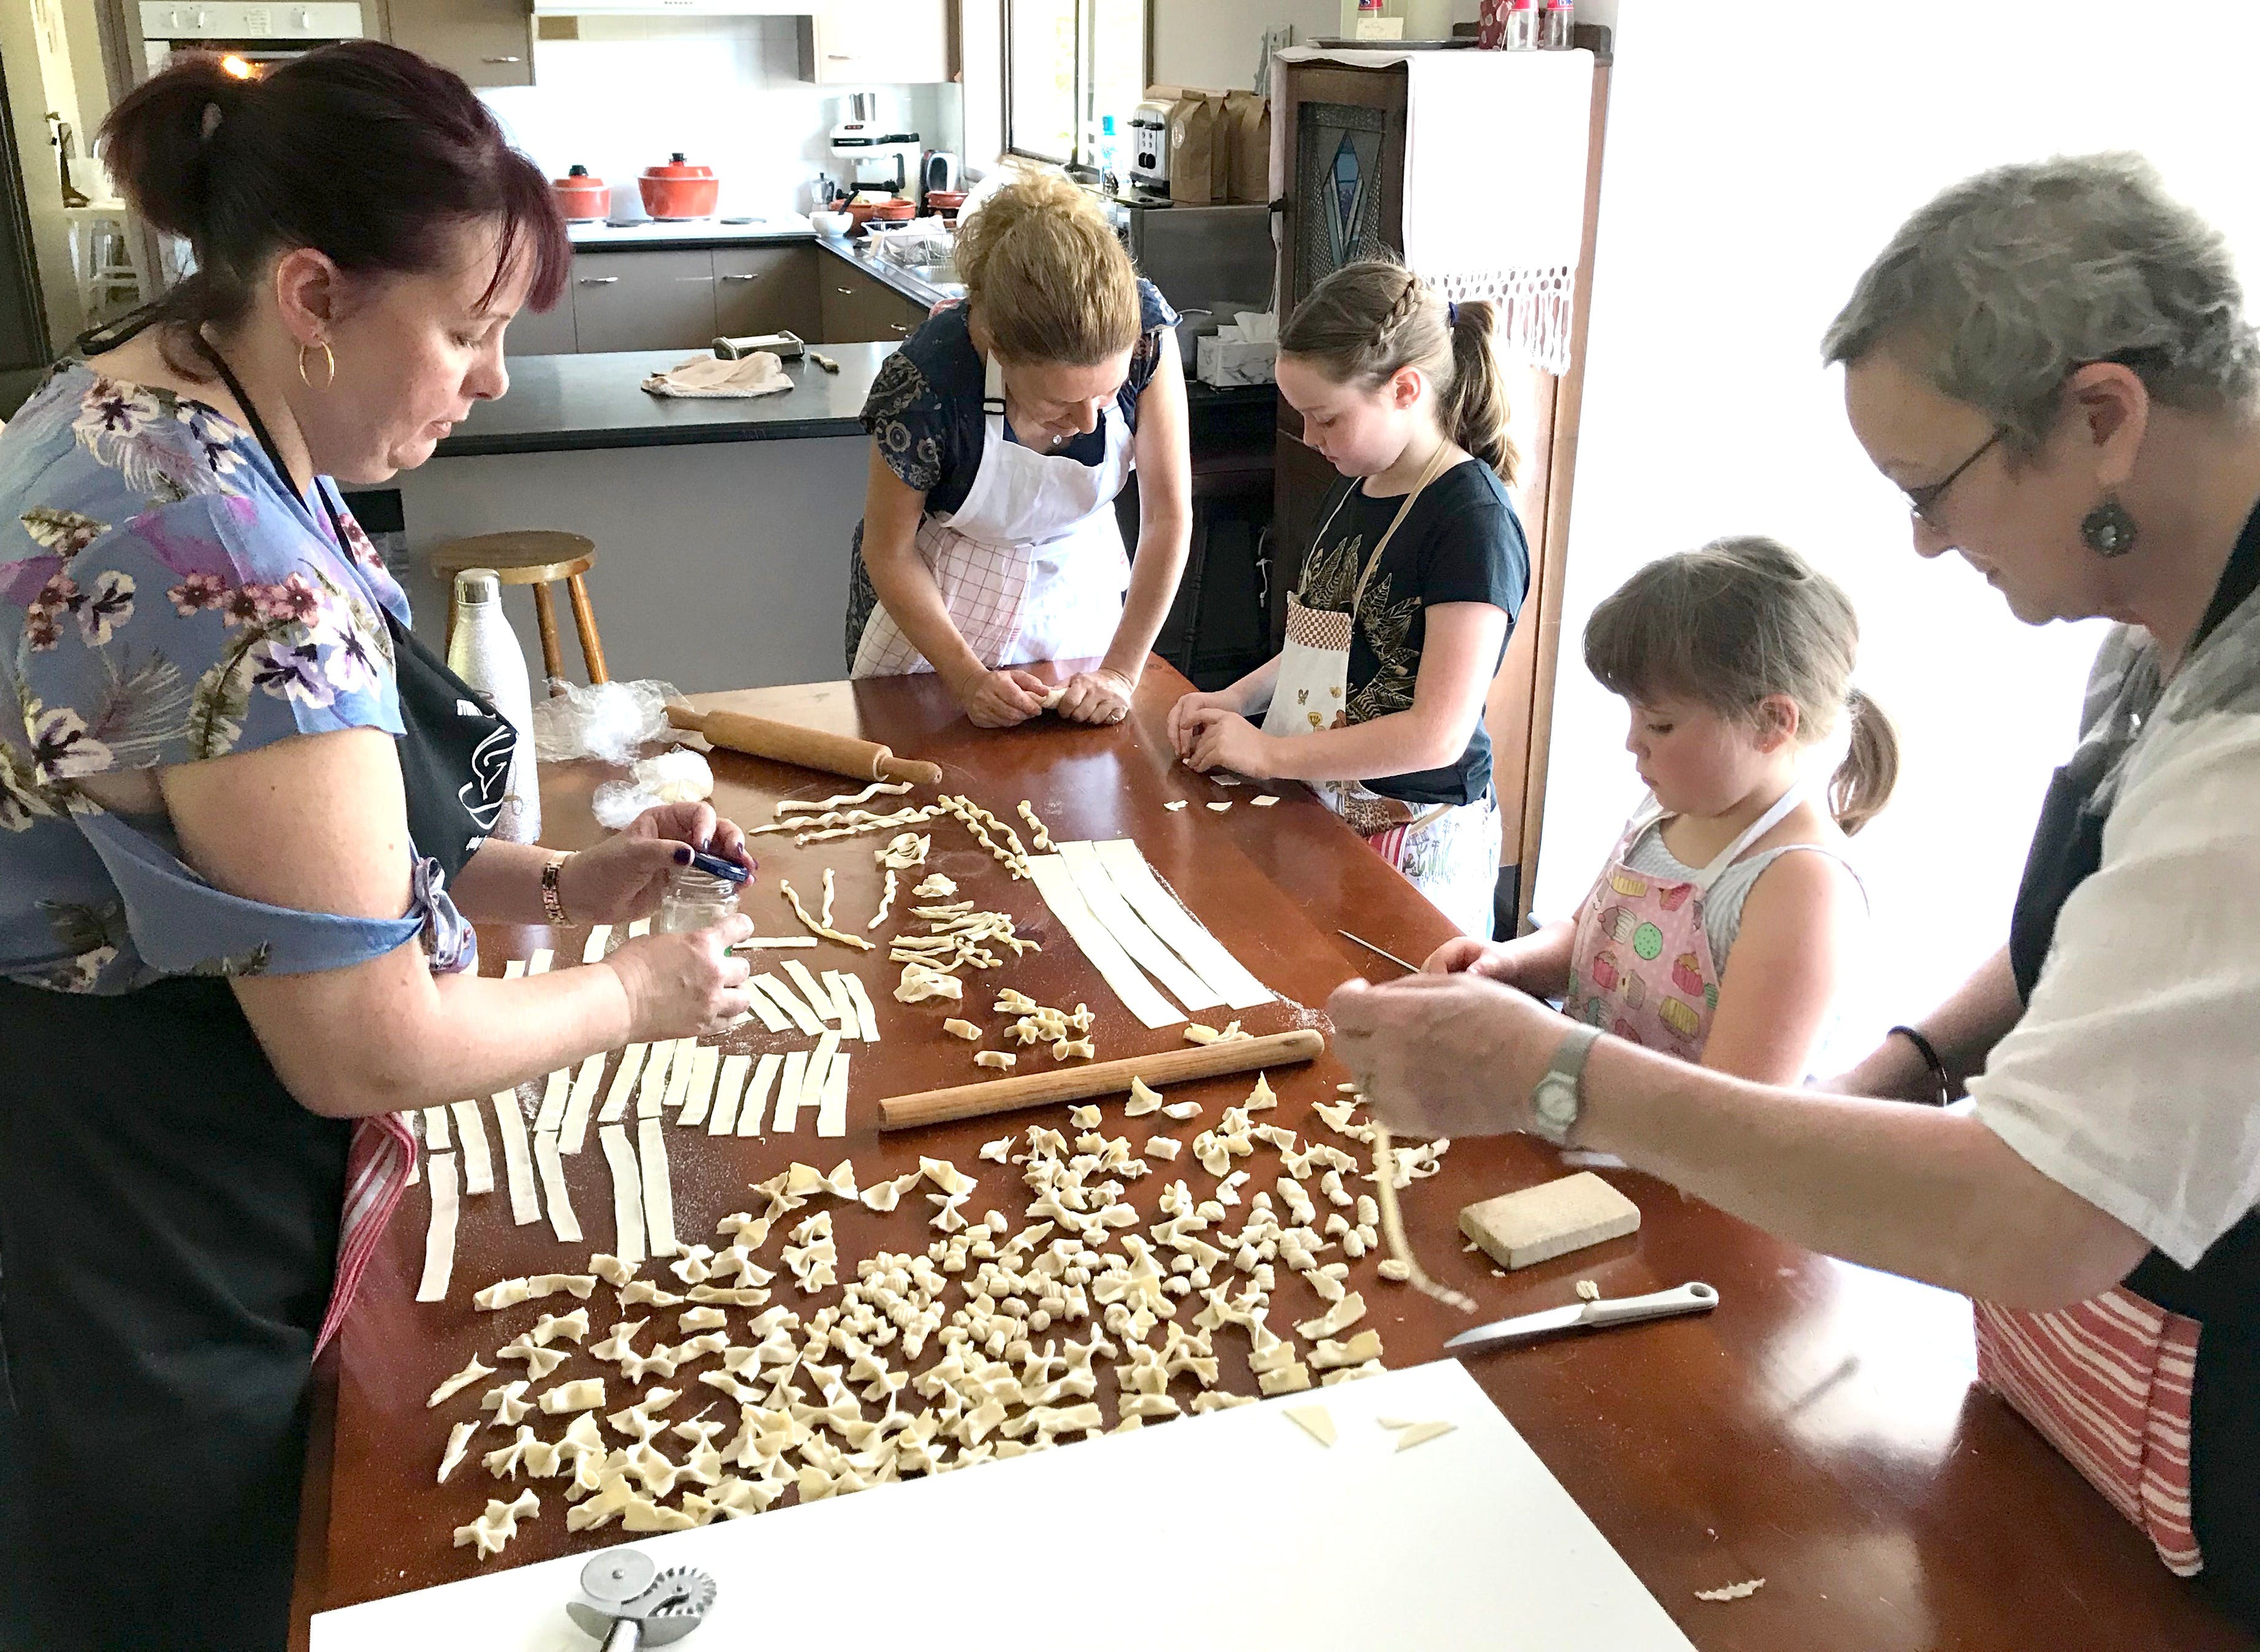 Kids Pasta Making Class - hands on fun at your house - St Kilda Accommodation